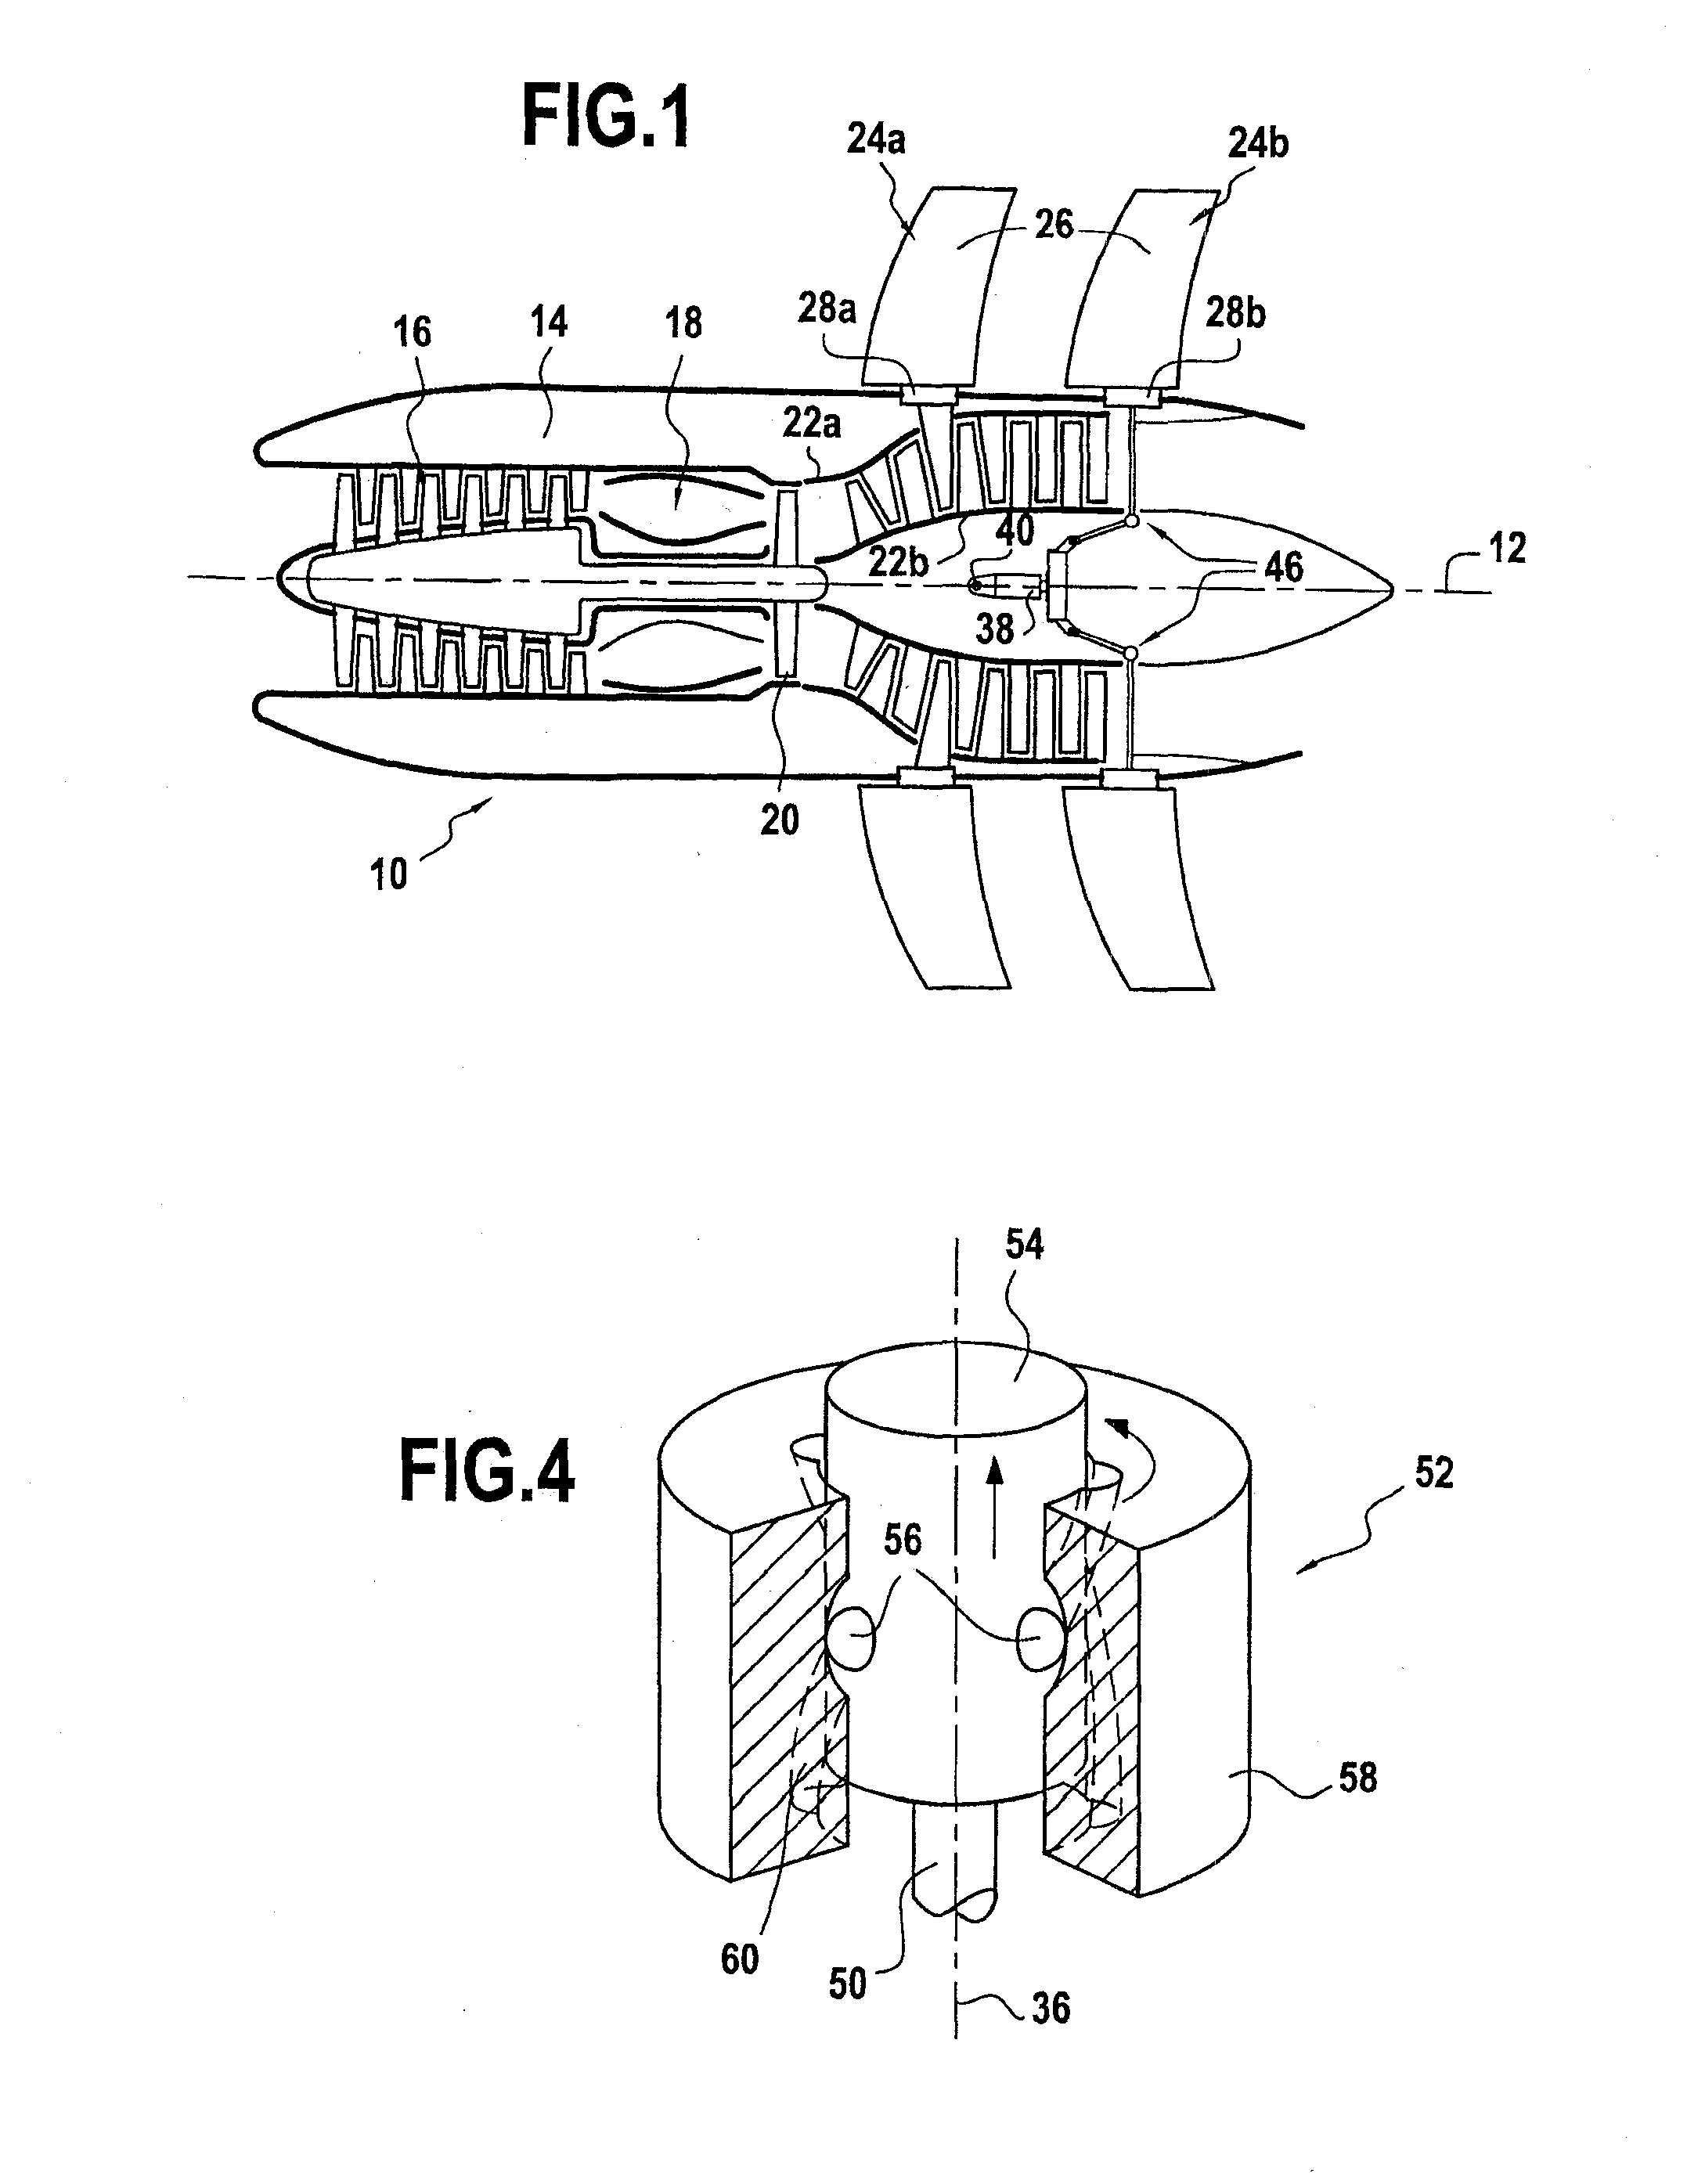 Stationary actuator device for controlling the pitch of fan blades of a turboprop